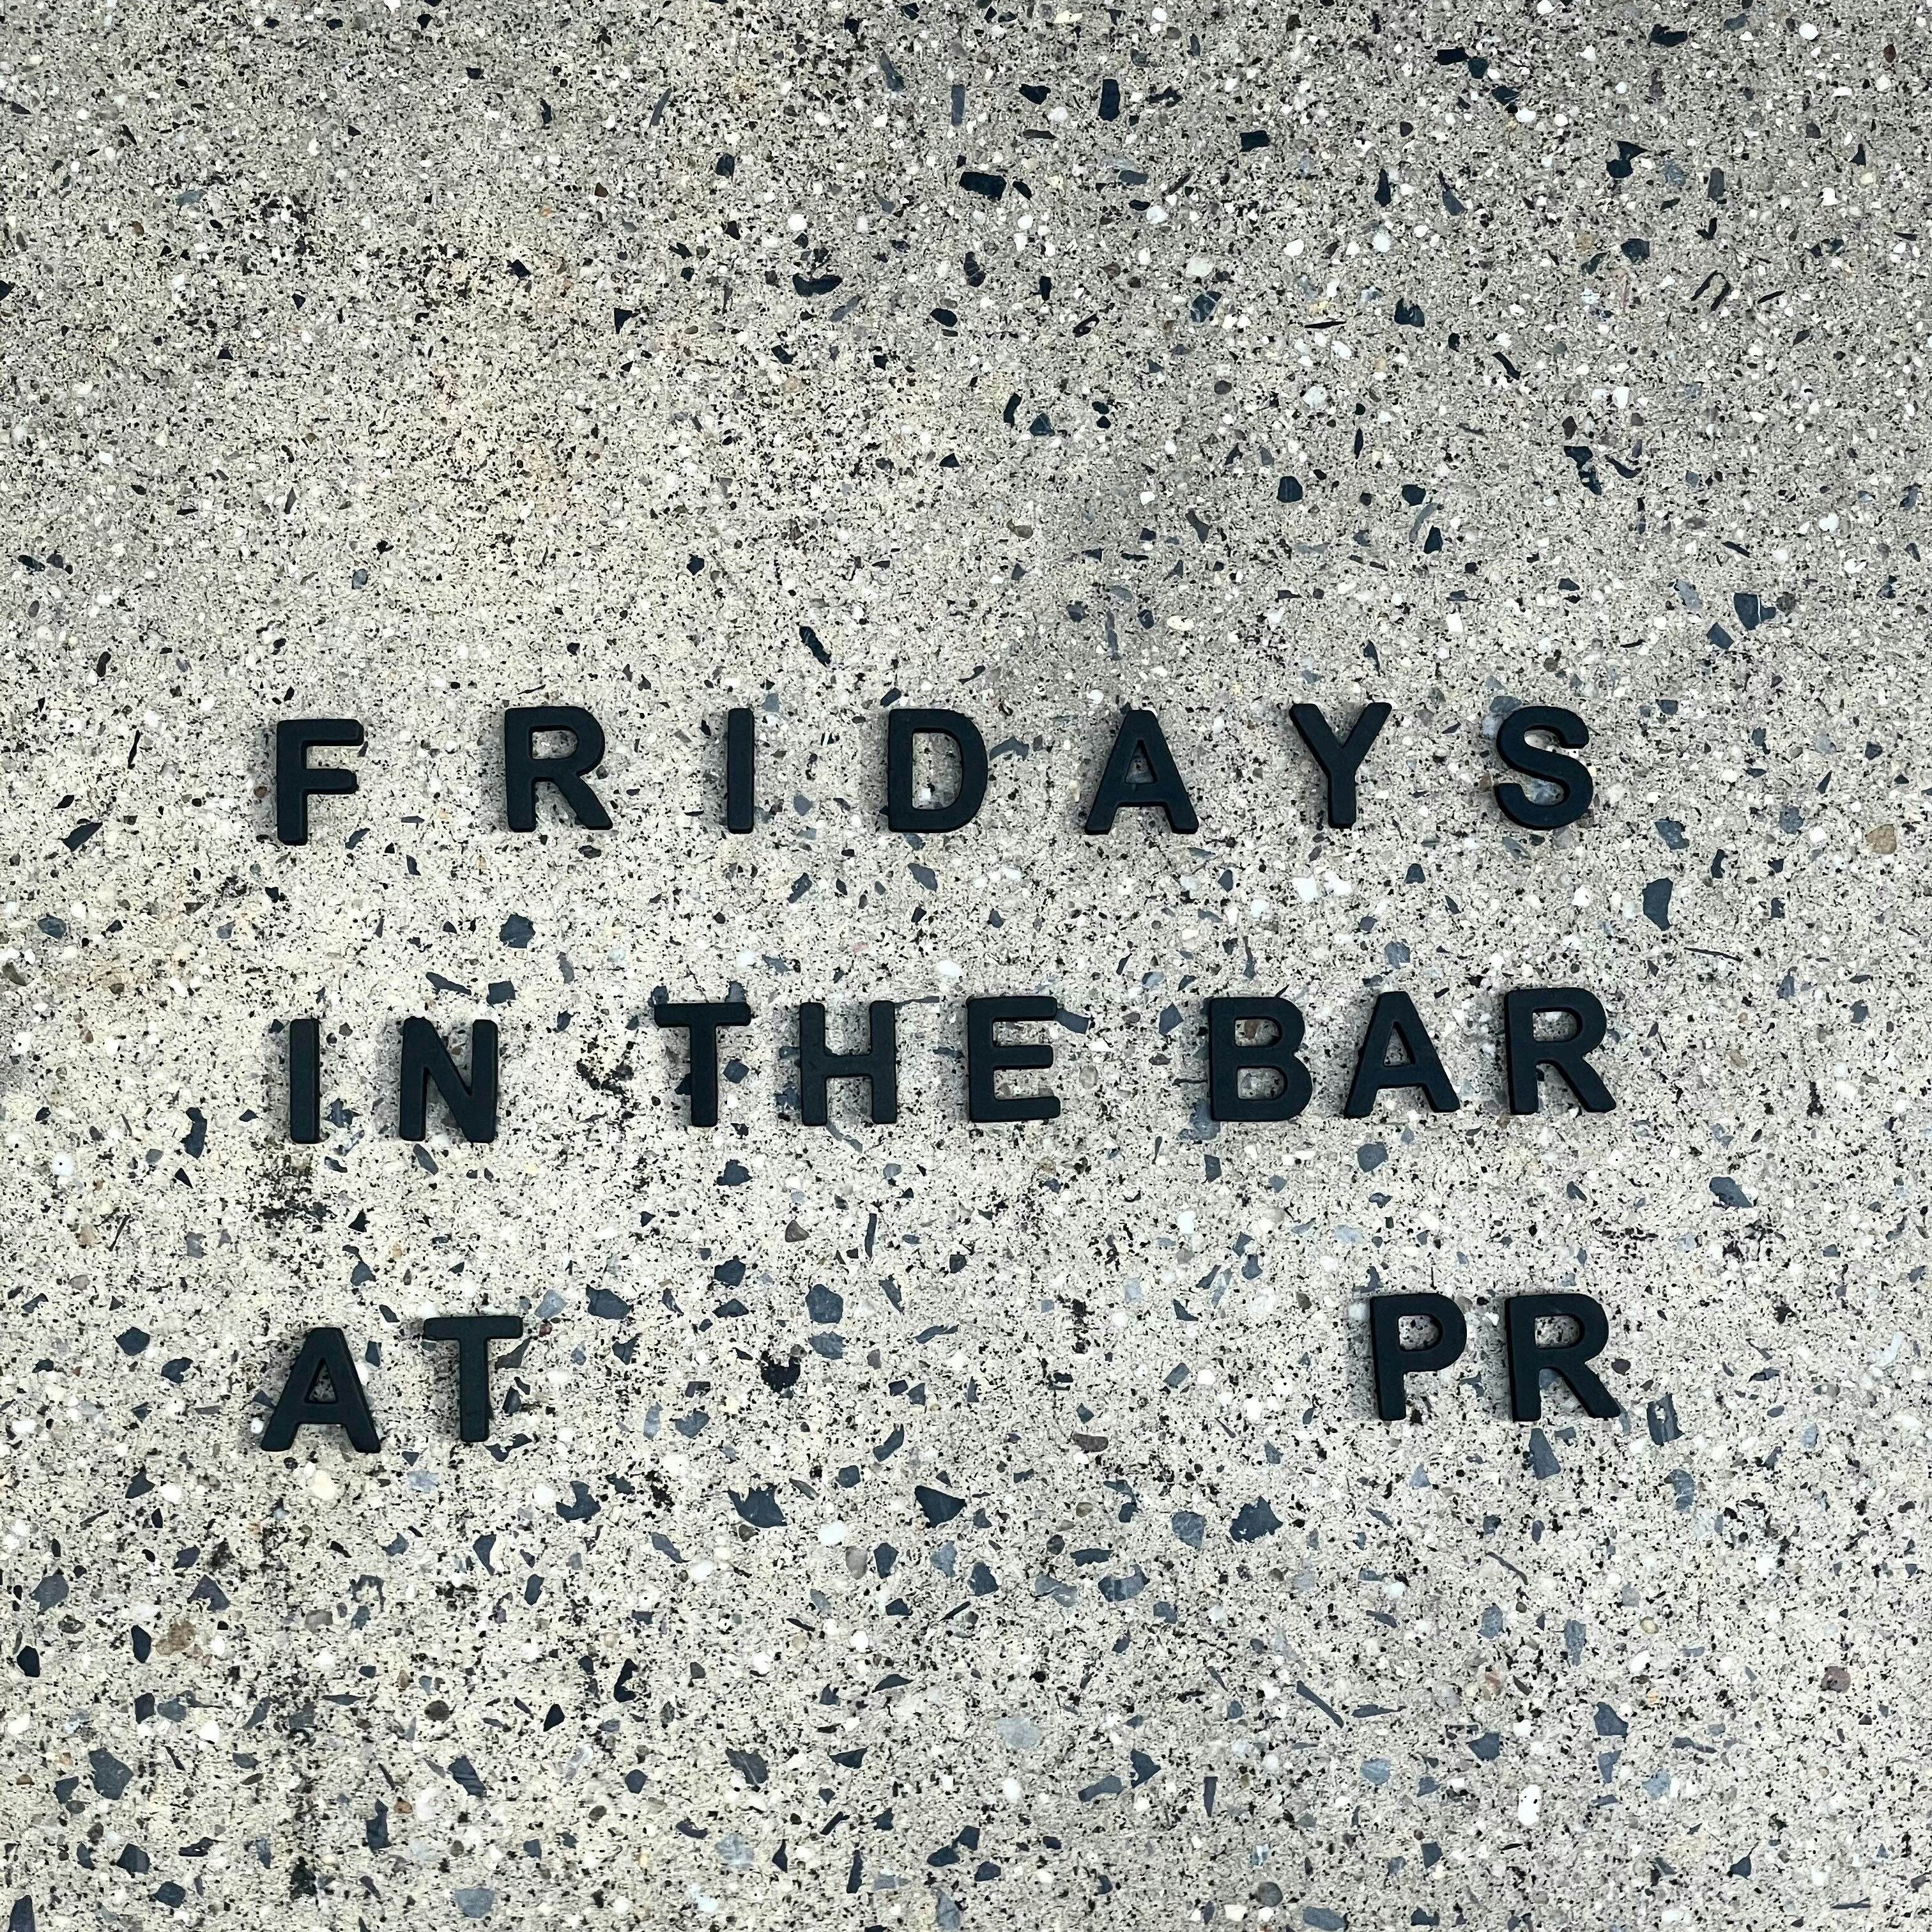 Fridays In the Bar at Public Records: Fever Dream